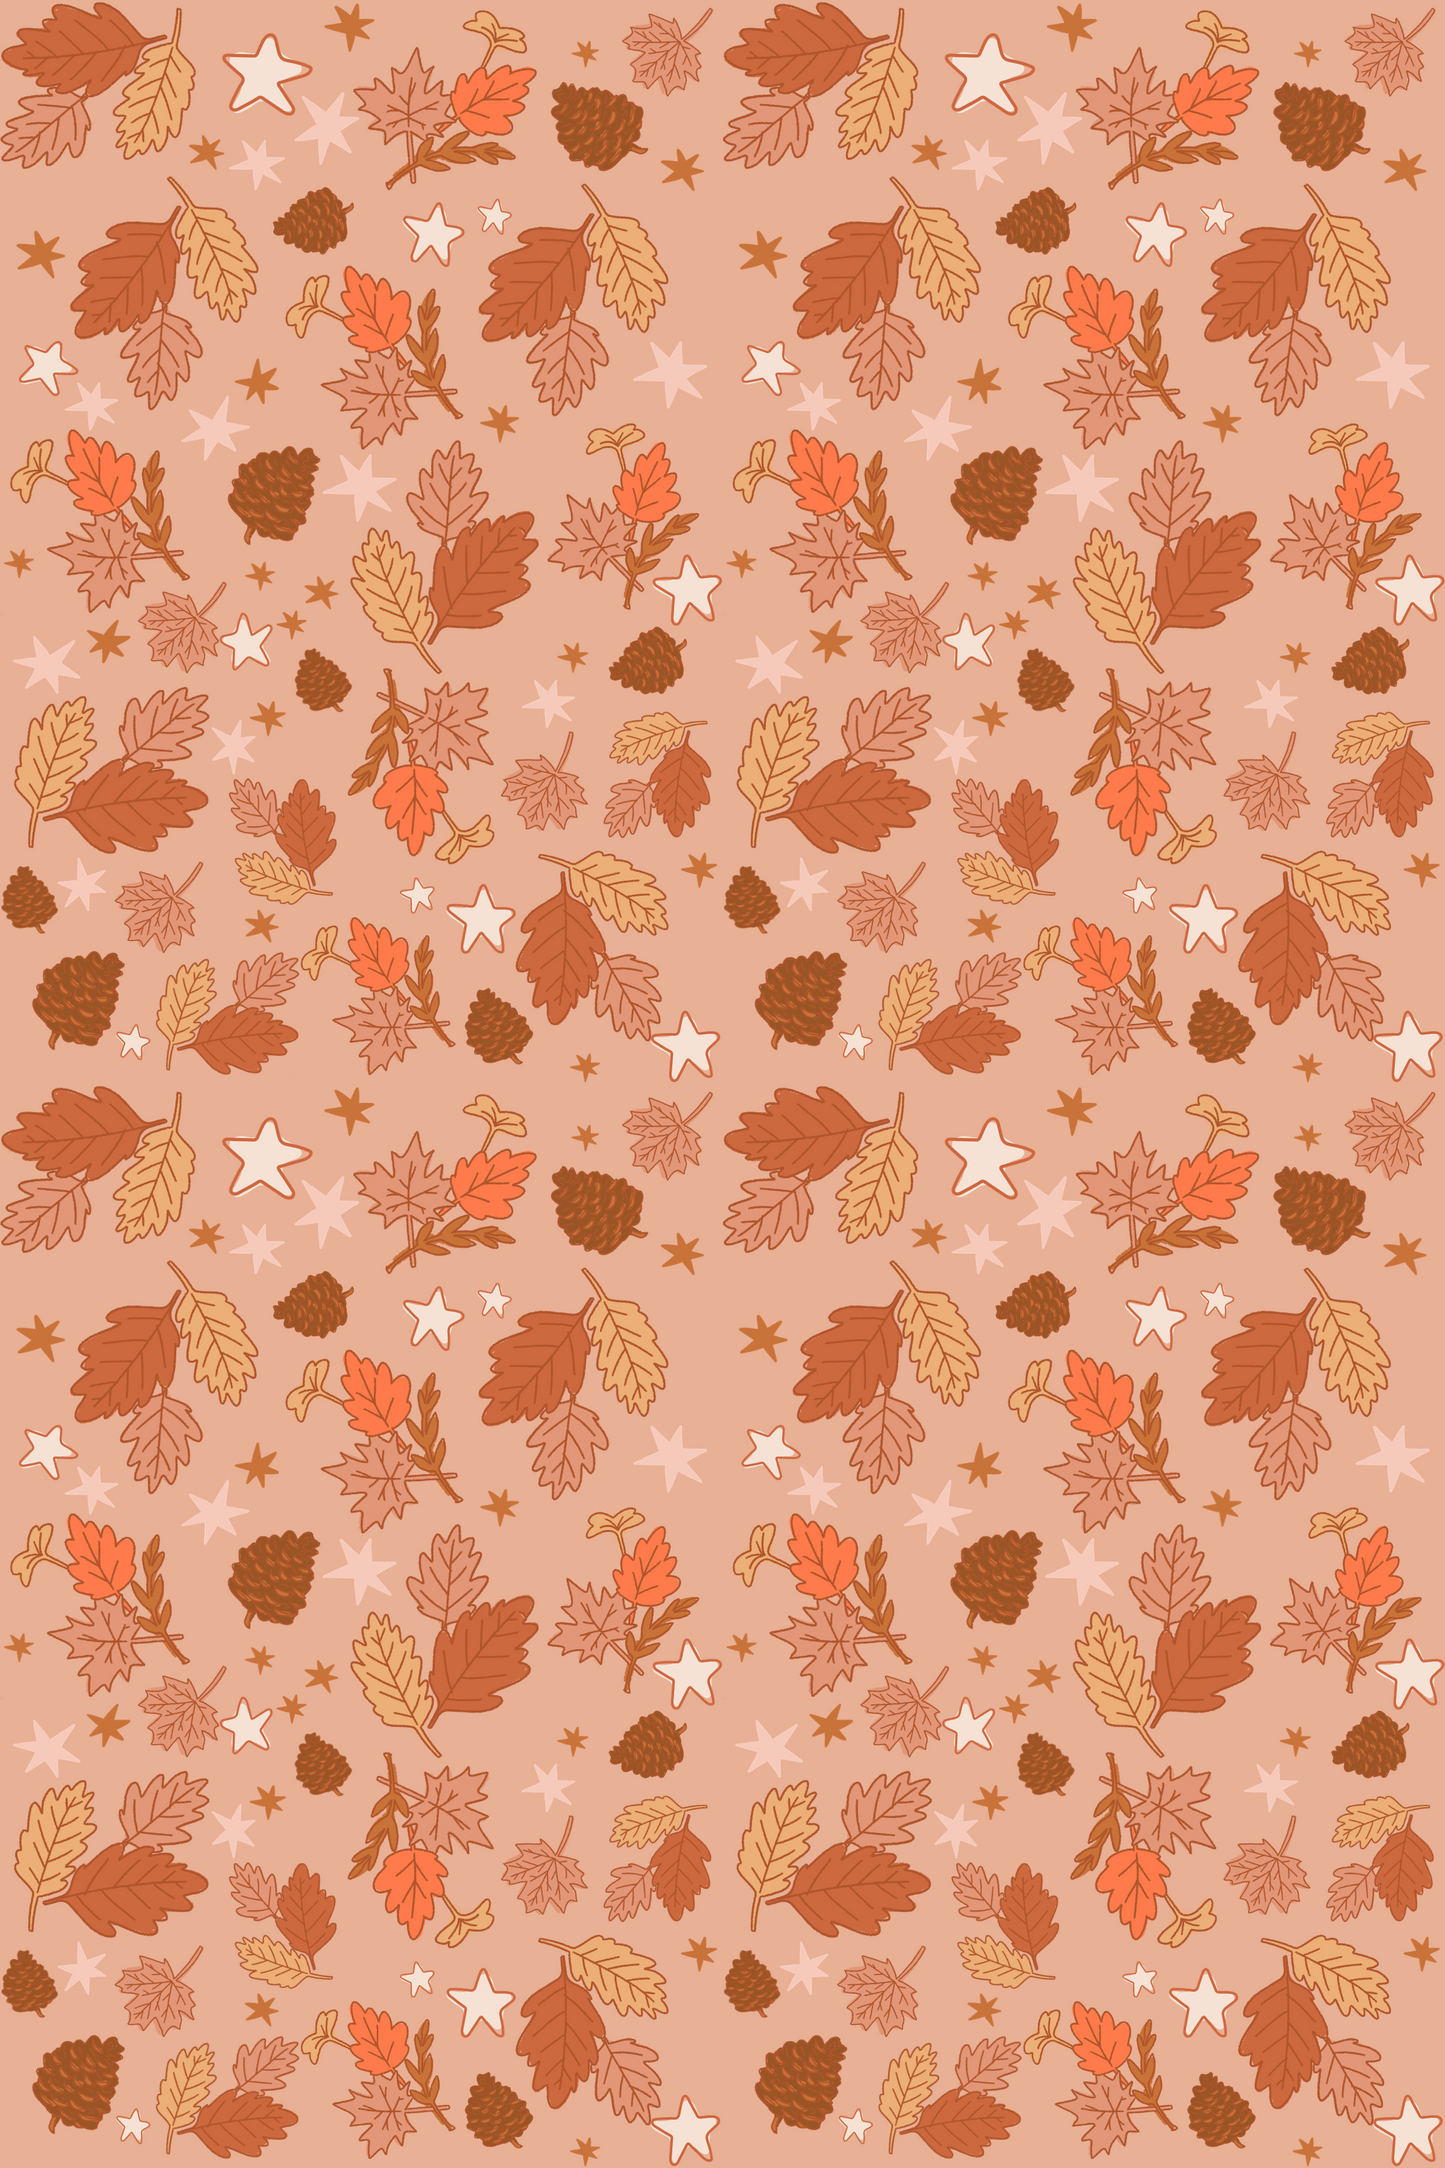 Thanksgiving patterns| Repeatable patterns